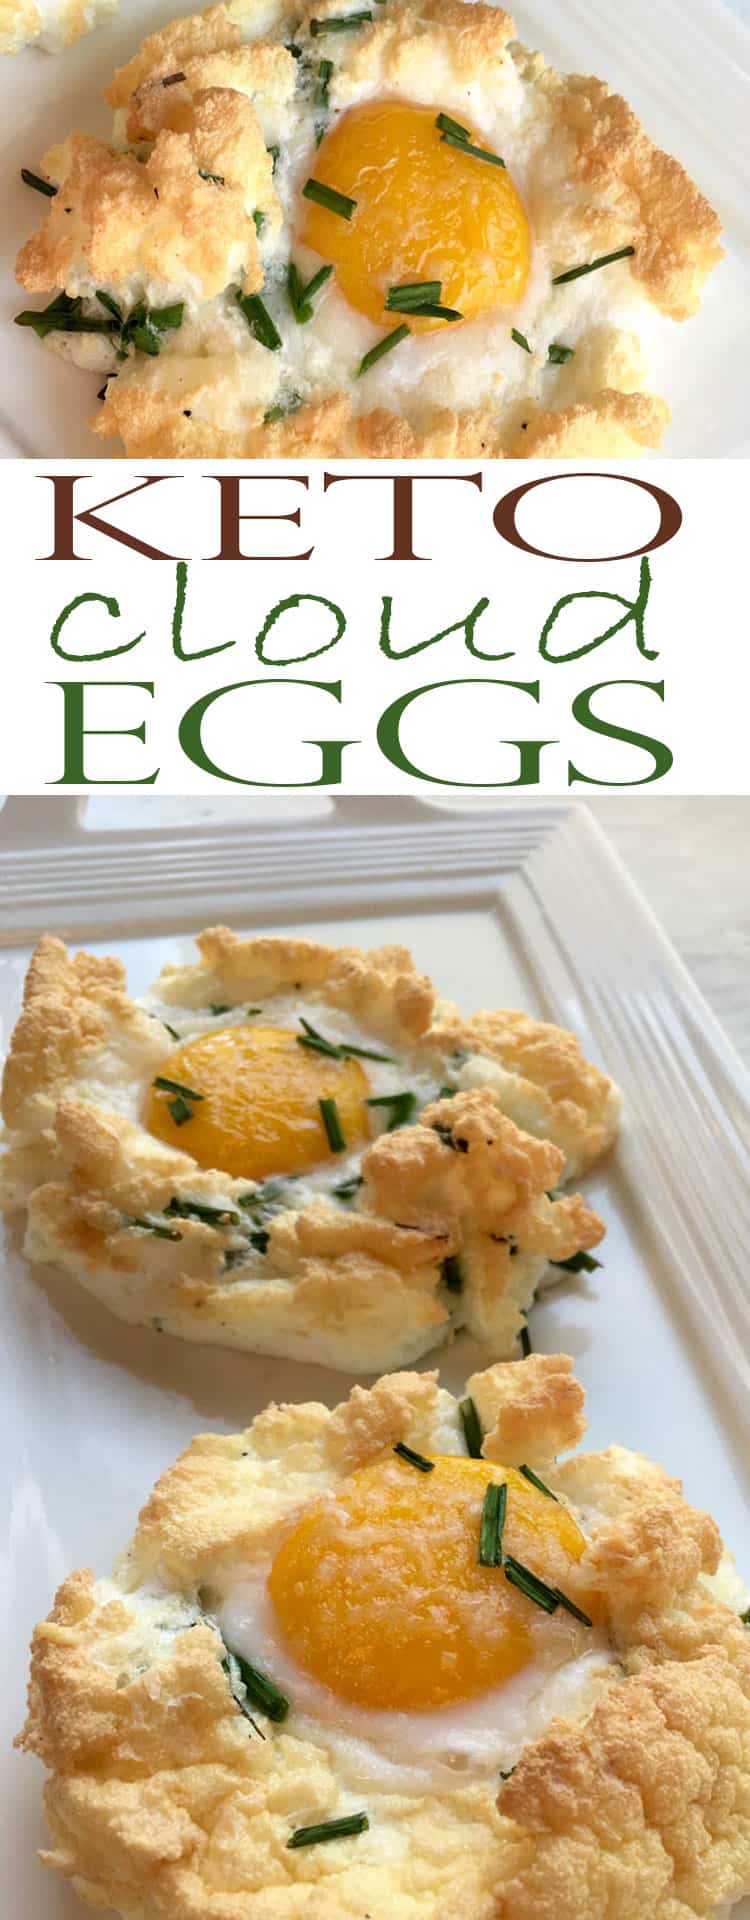 If you're looking for a tasty keto egg recipe, I've got you covered with these Asiago Cheese Cloud Eggs. Cloud eggs are a versatile and fun spin on traditional egg recipes — even if you're sick of eating eggs, you'll love cloud eggs!